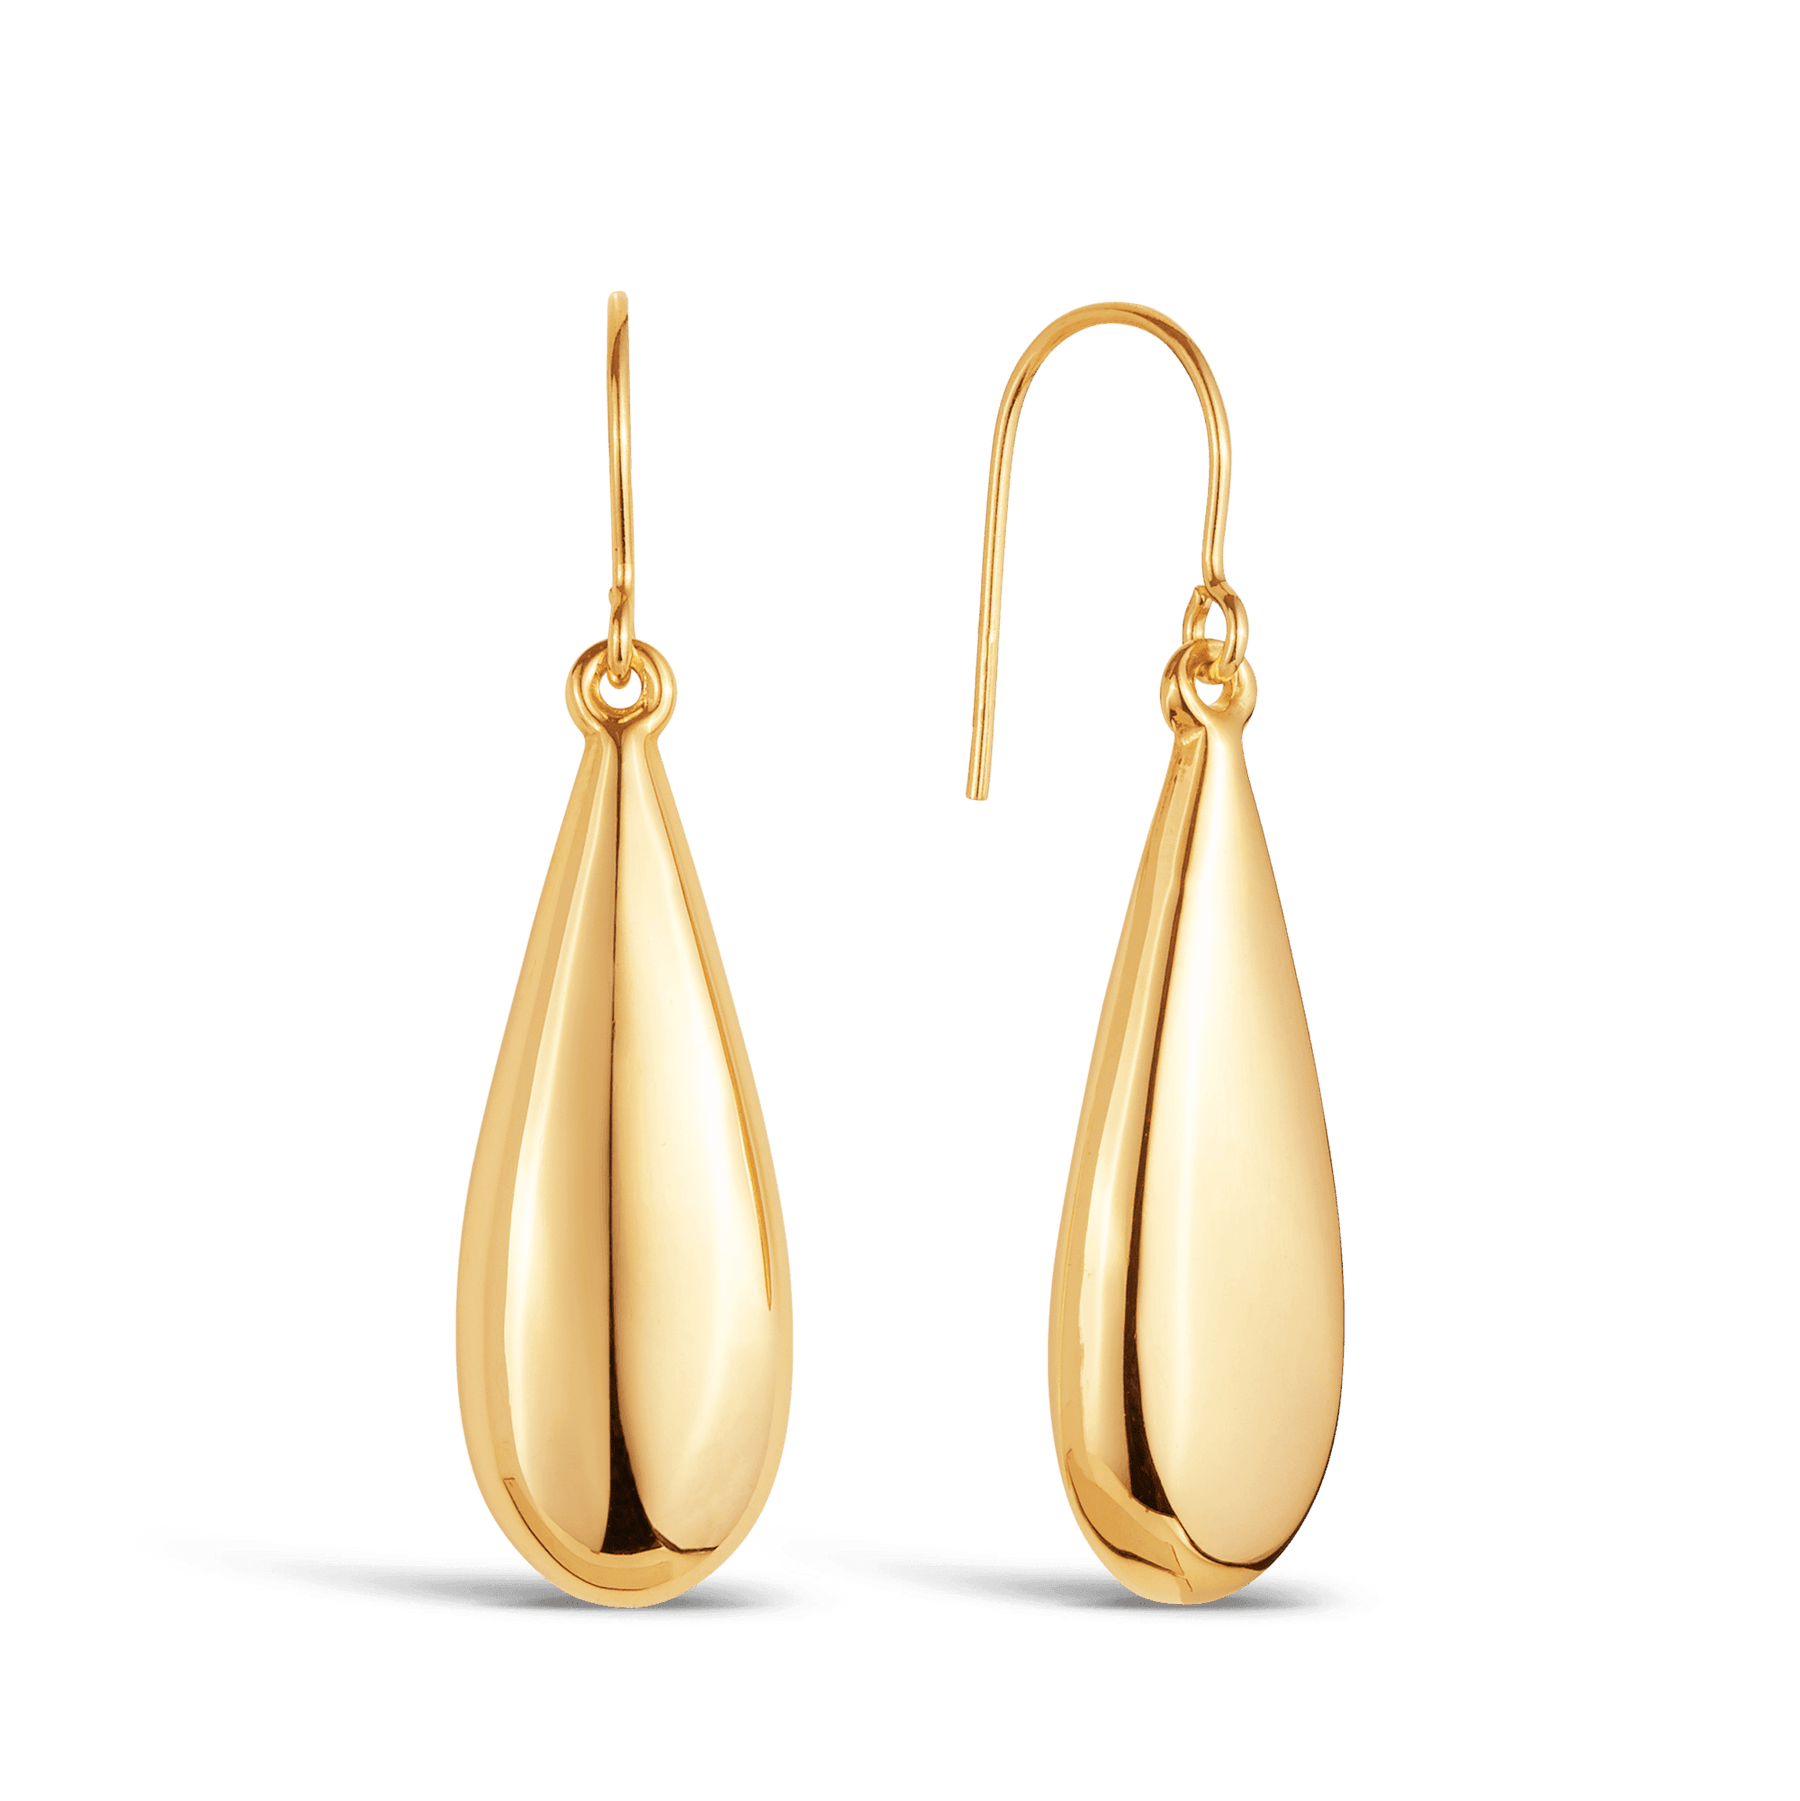 Antique Long Torpedo Drop Earrings, 15 Carat Yellow Gold Dangle Earrings.  Late Victorian Circa 1890s. - Addy's Vintage